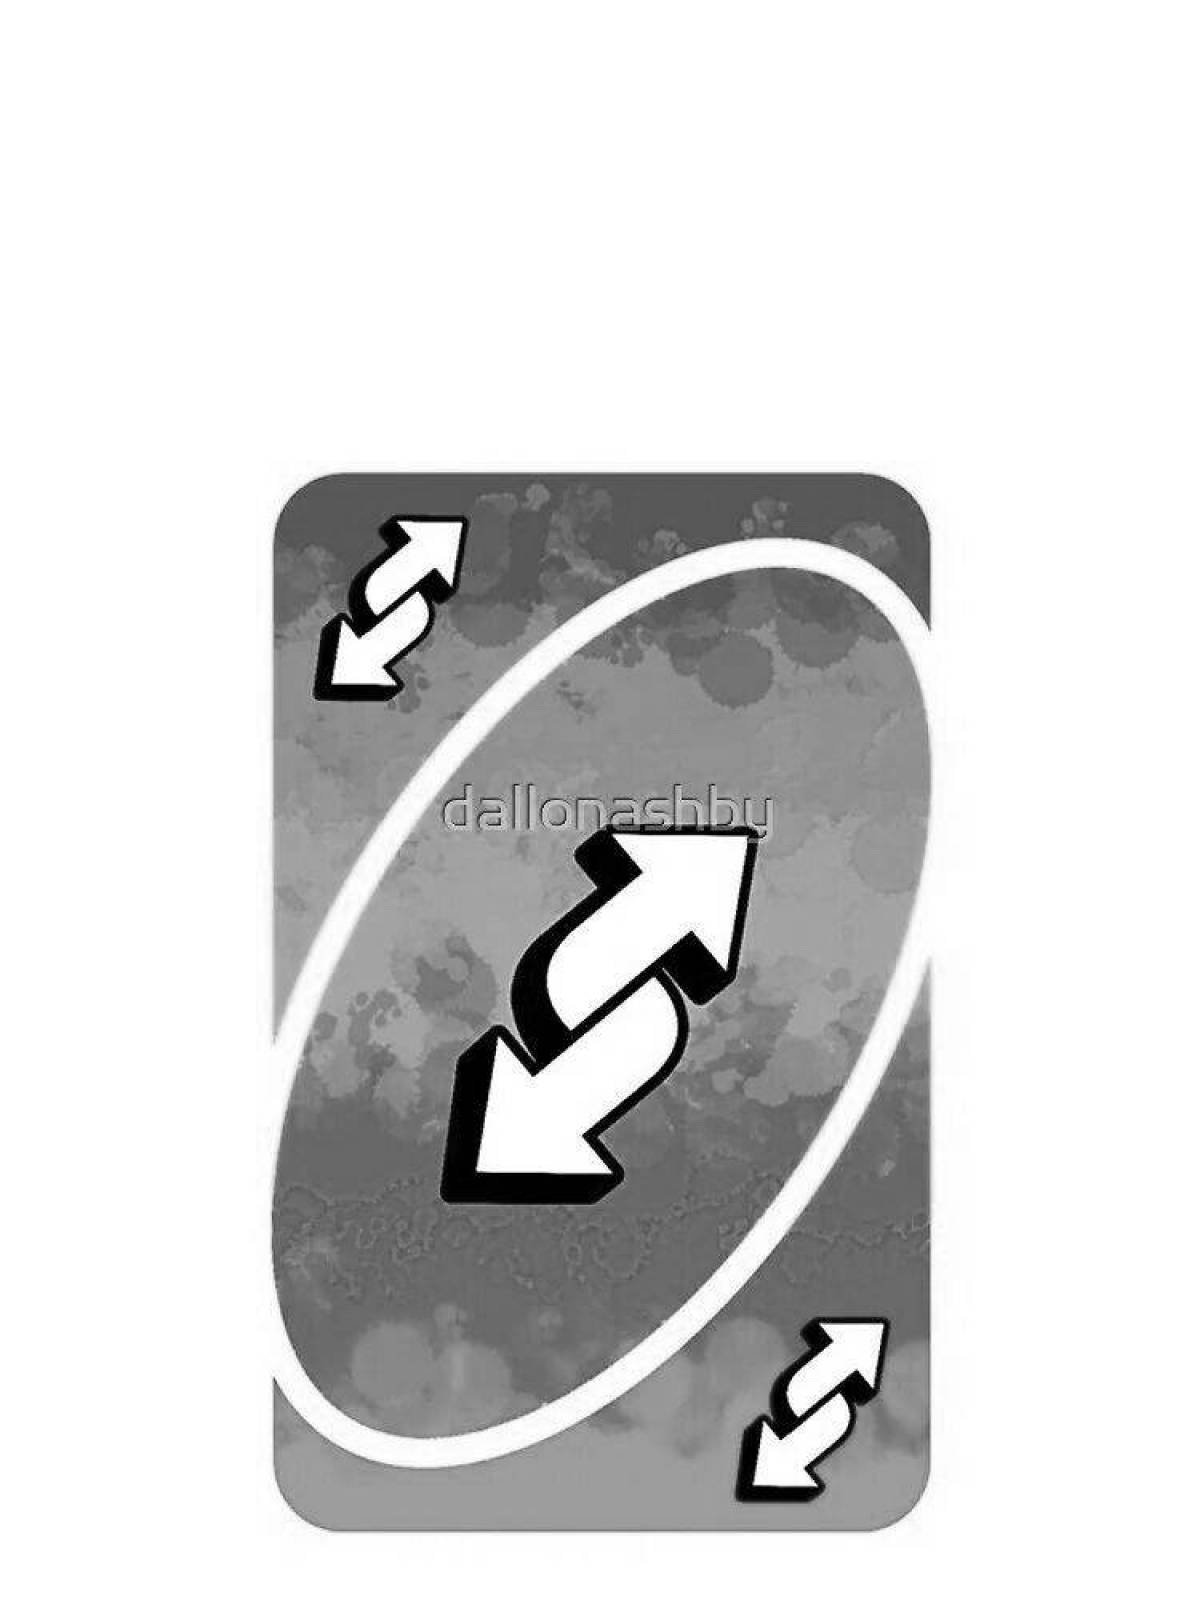 Sparkling uno card with hearts